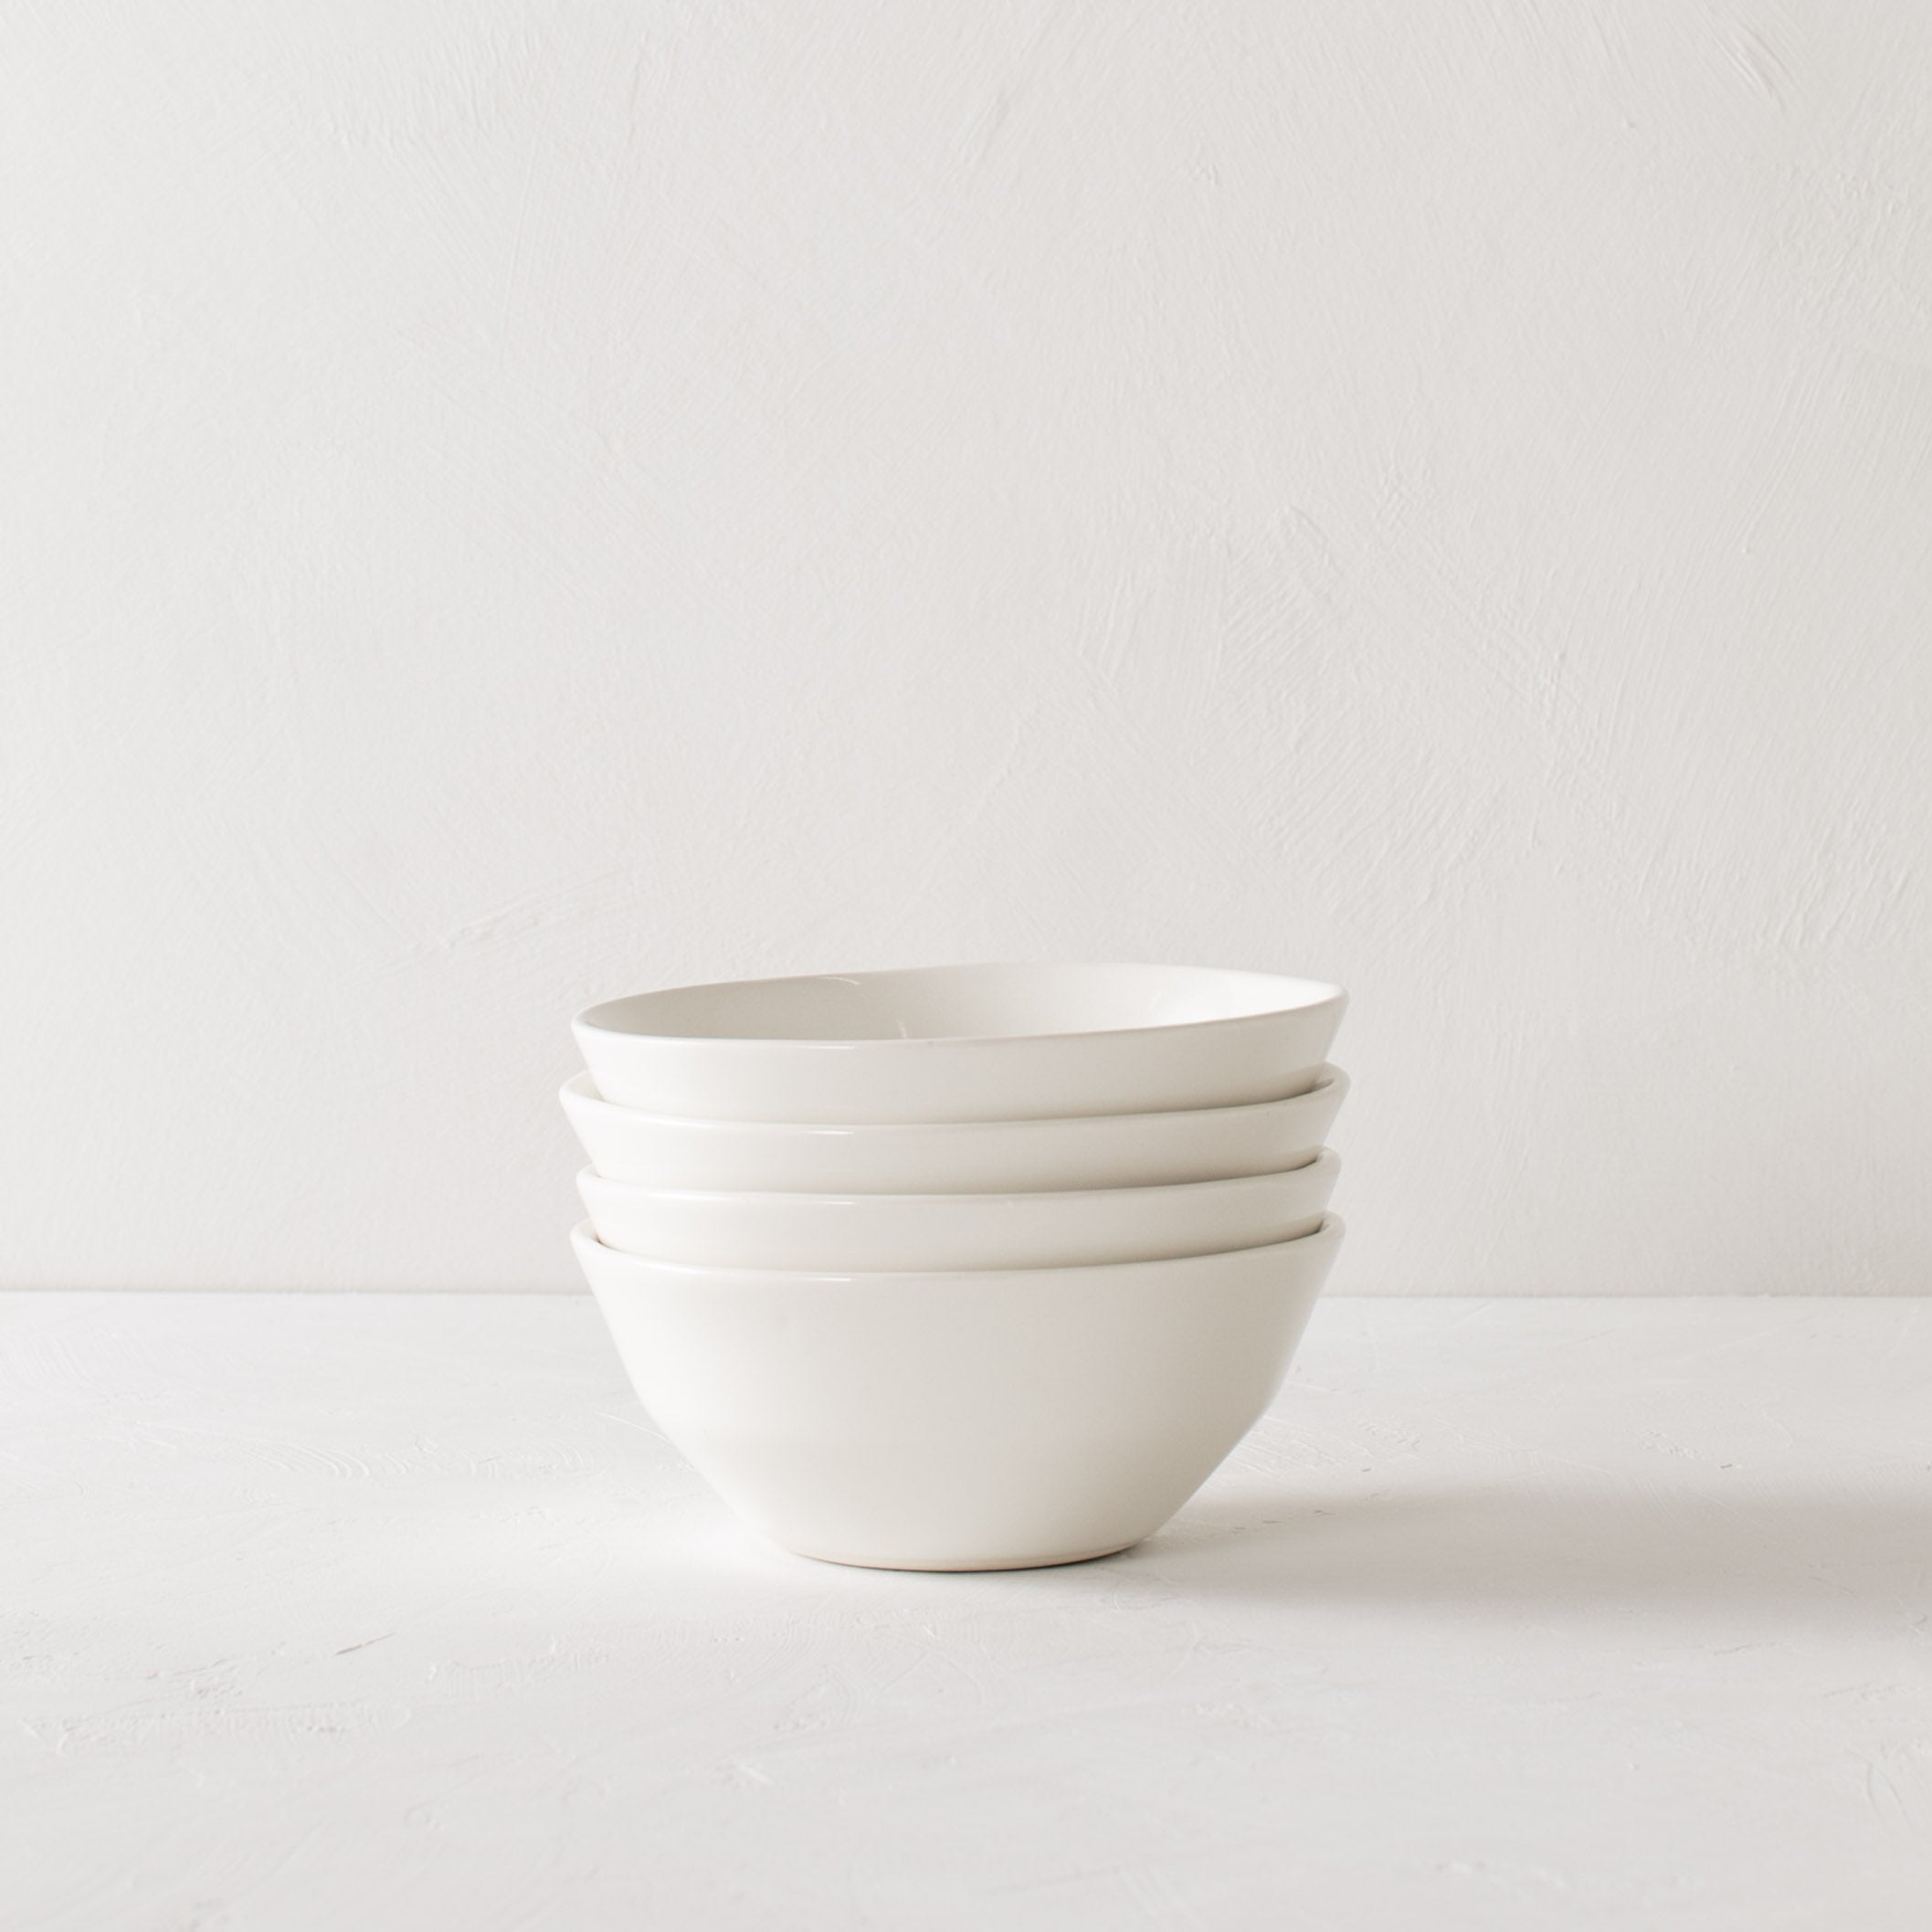 Four white minimal ceramic bowls stacked in the center on a white textured tabletop against a white textured backdrop. Handmade ceramics designed and sold by Convivial Production. Kansas City Ceramics.